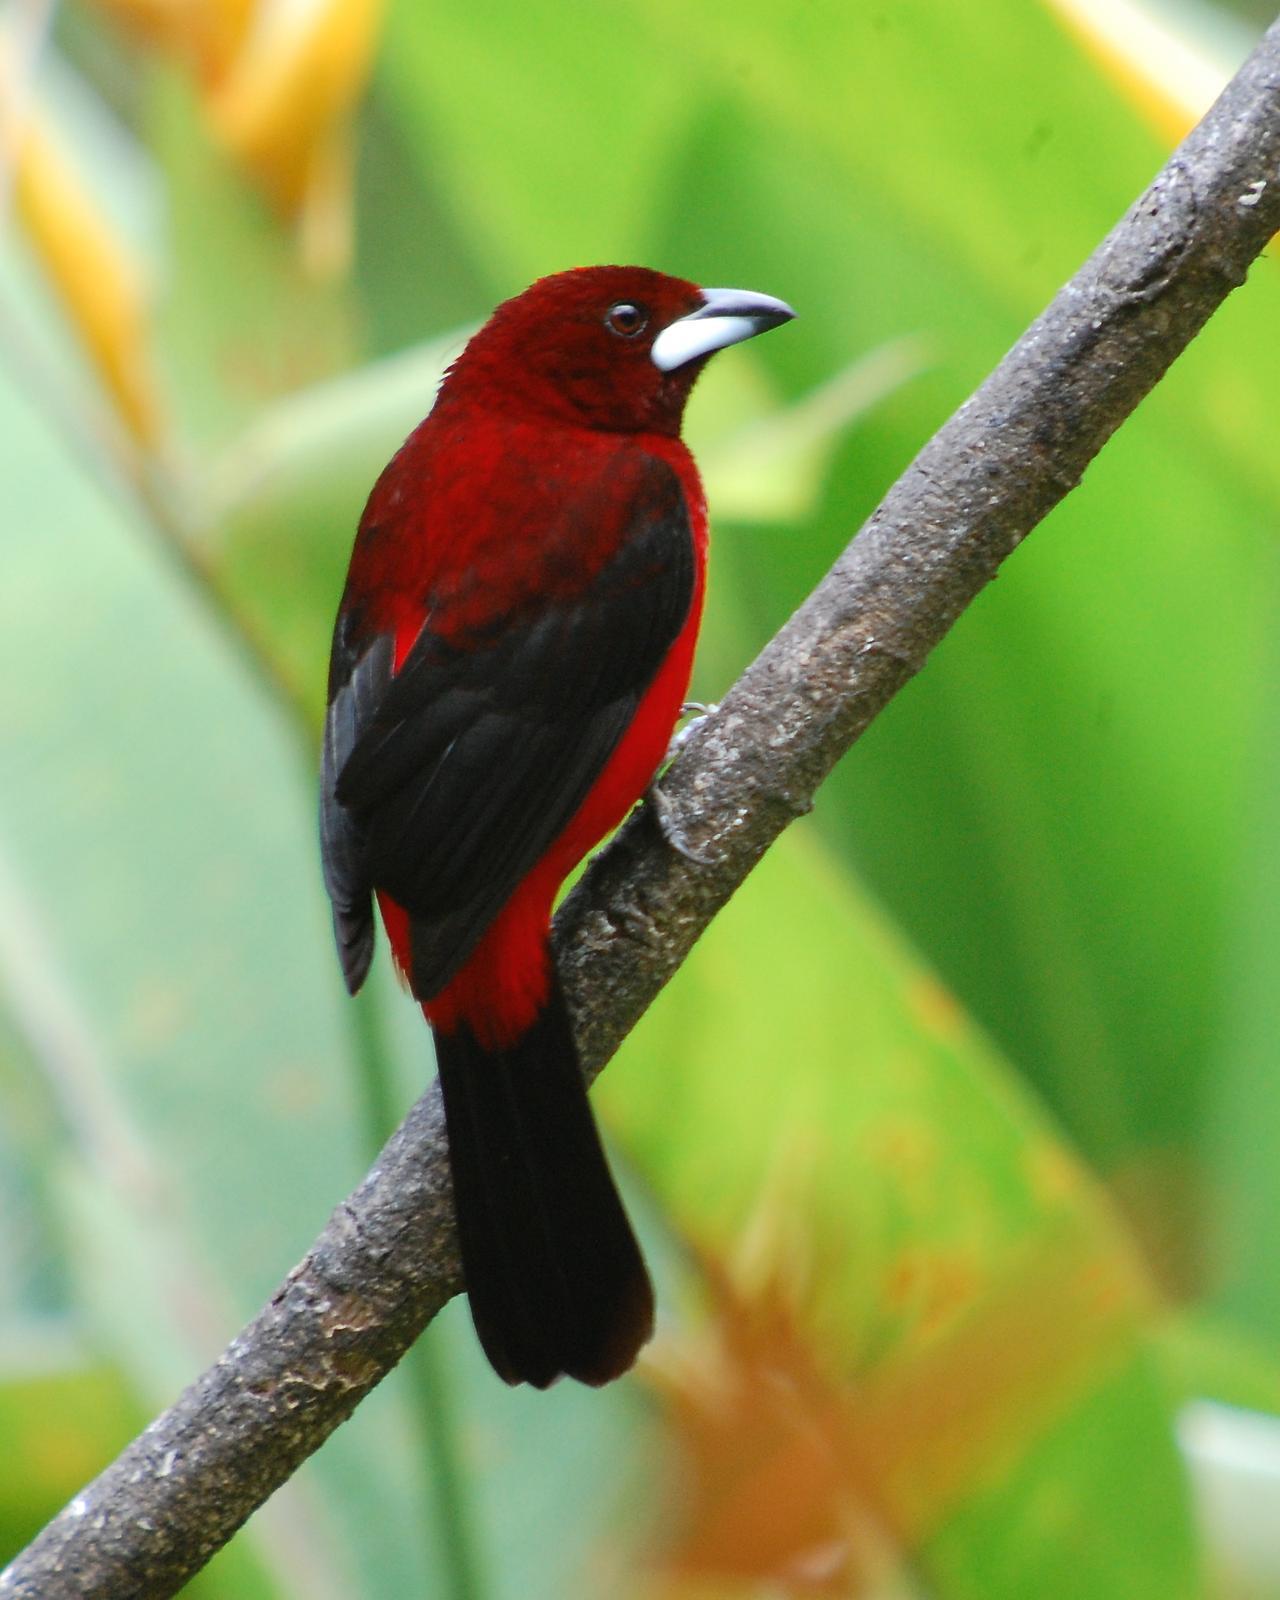 Silver-beaked Tanager Photo by Birdchick.com